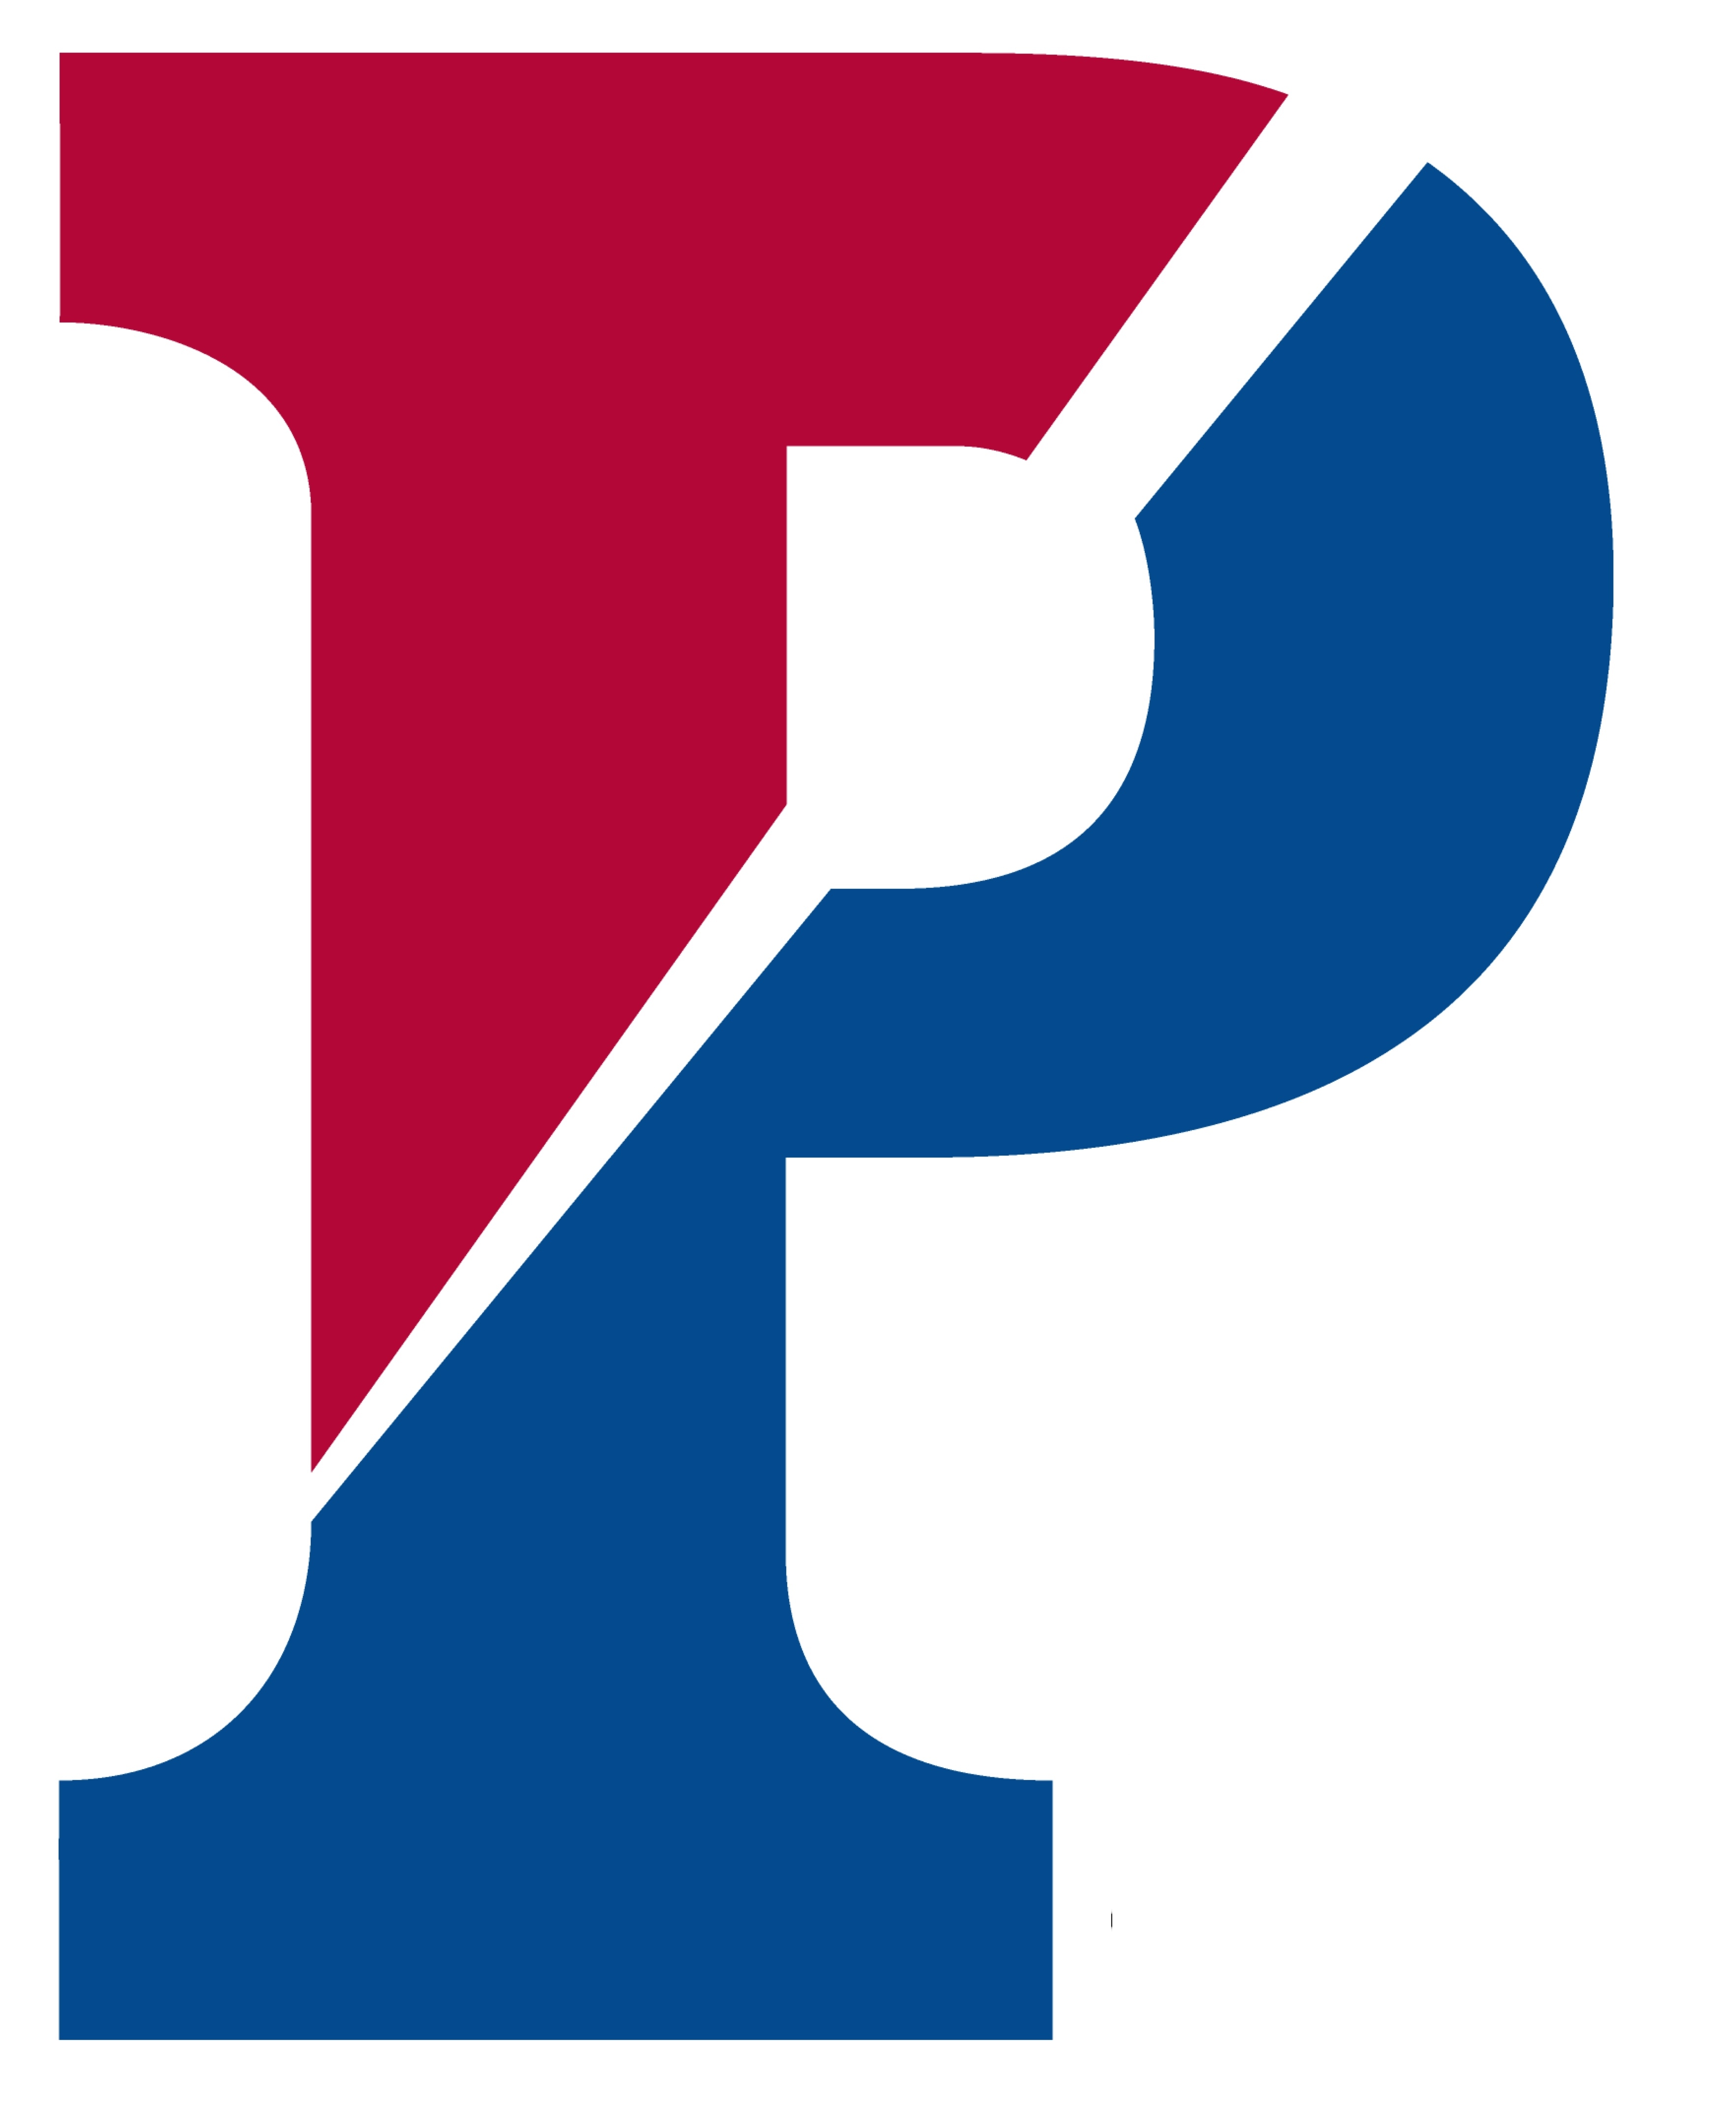 P Letter Design In Red And Blue